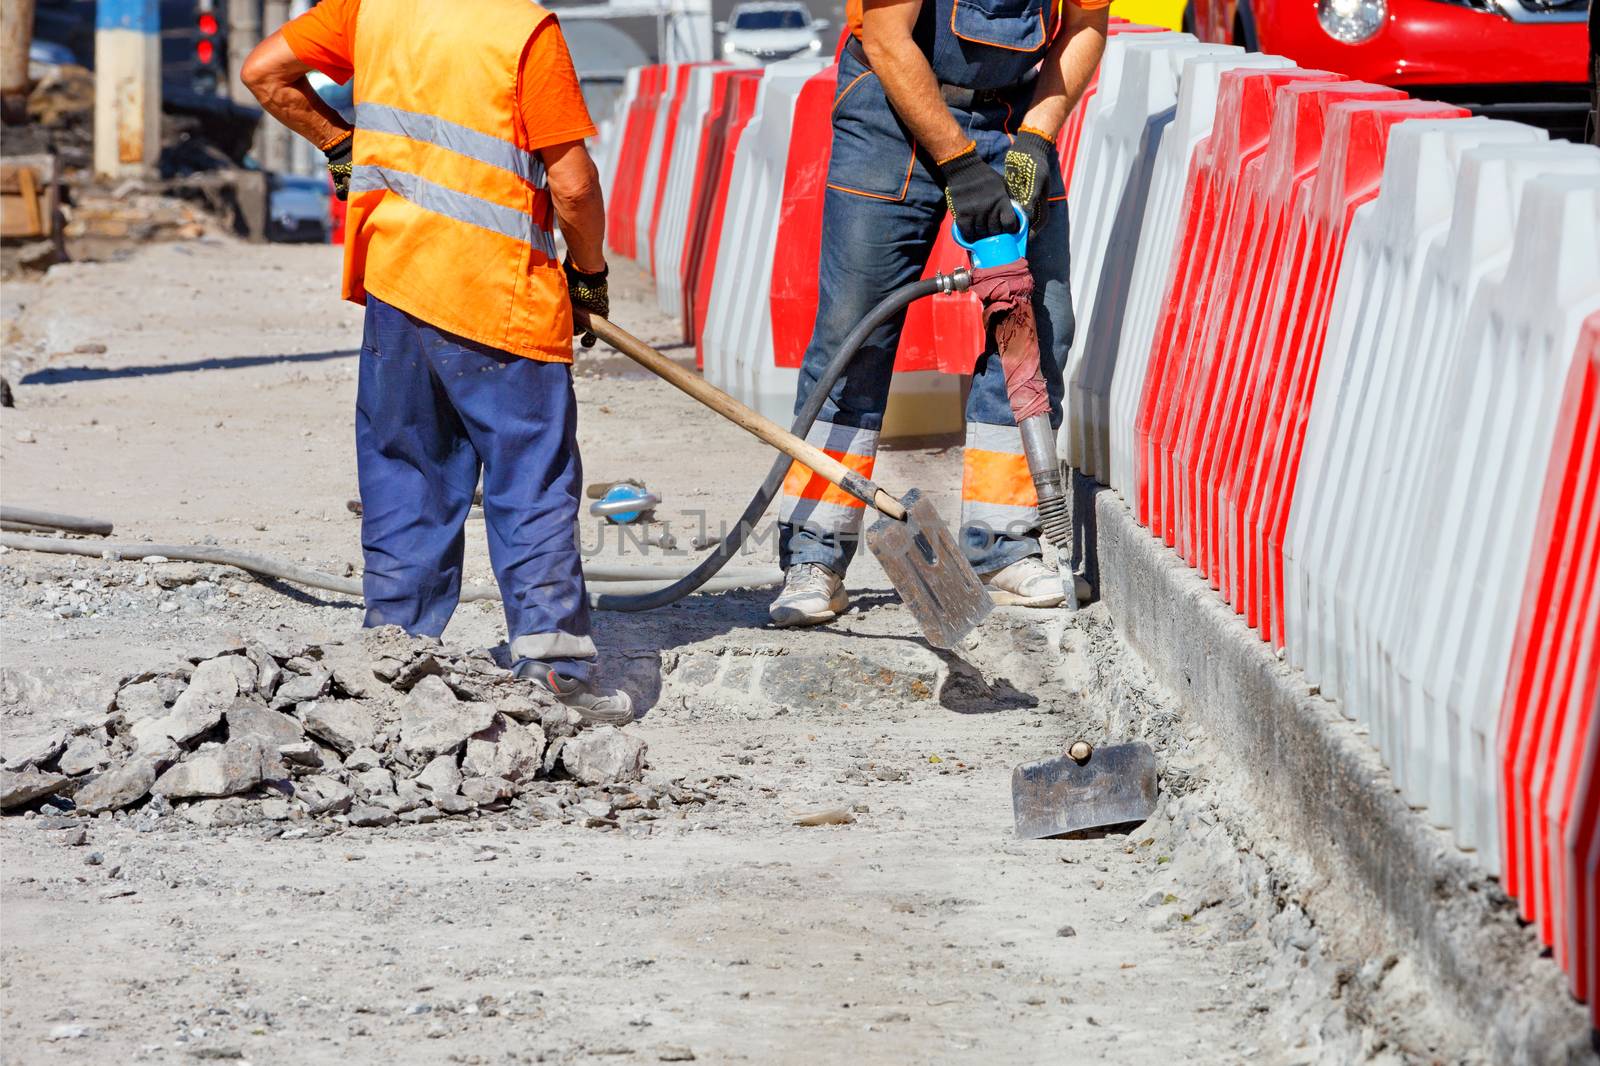 Workers repairing an old section of the road using a pneumatic jackhammer and shovels to remove worn parts of the road, copy space.